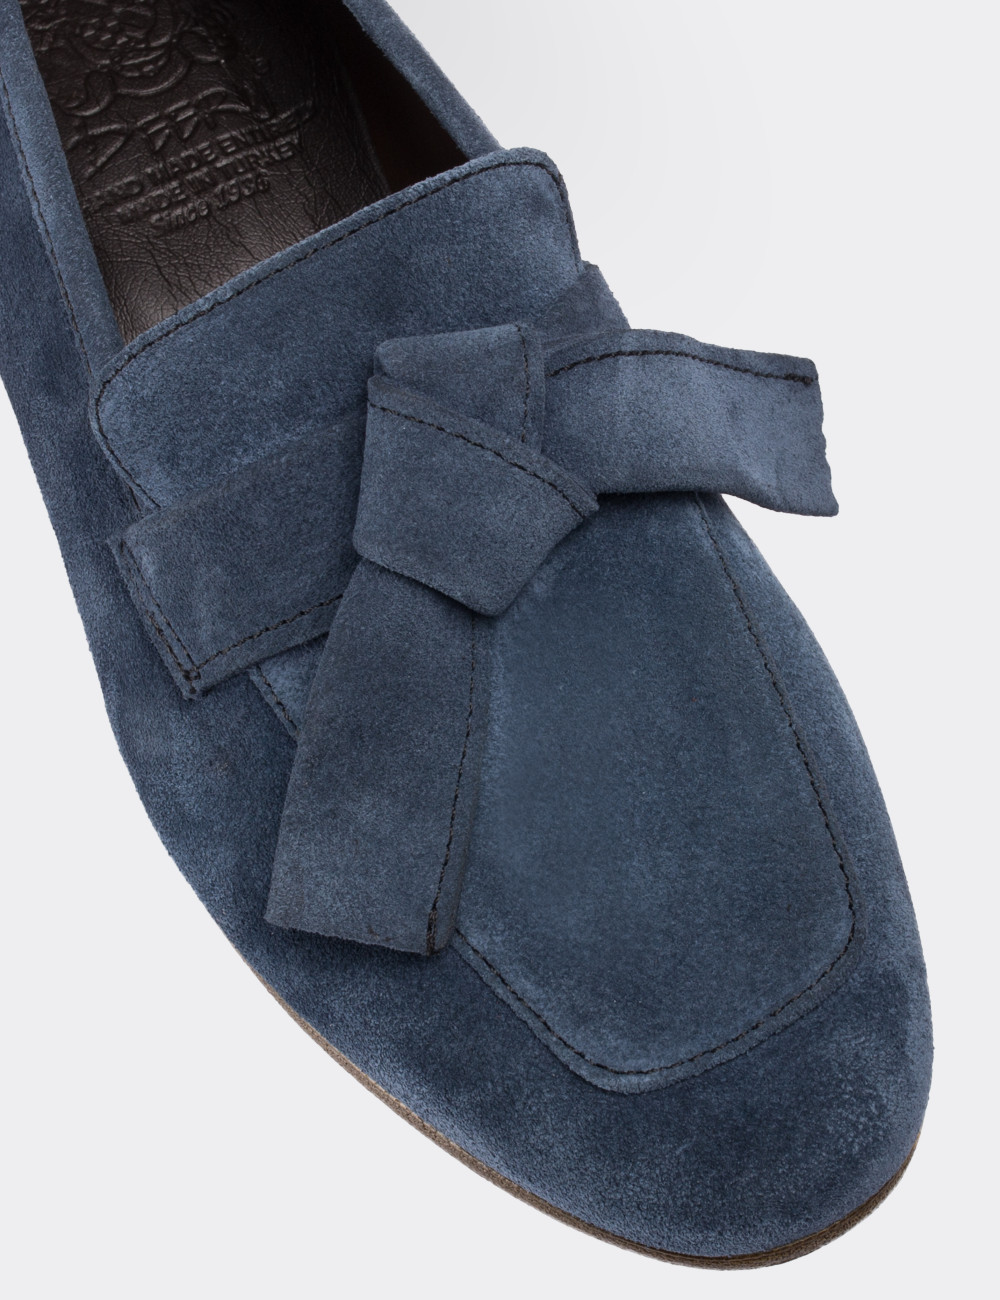 Blue Suede Leather Loafers - 01744ZMVIM01